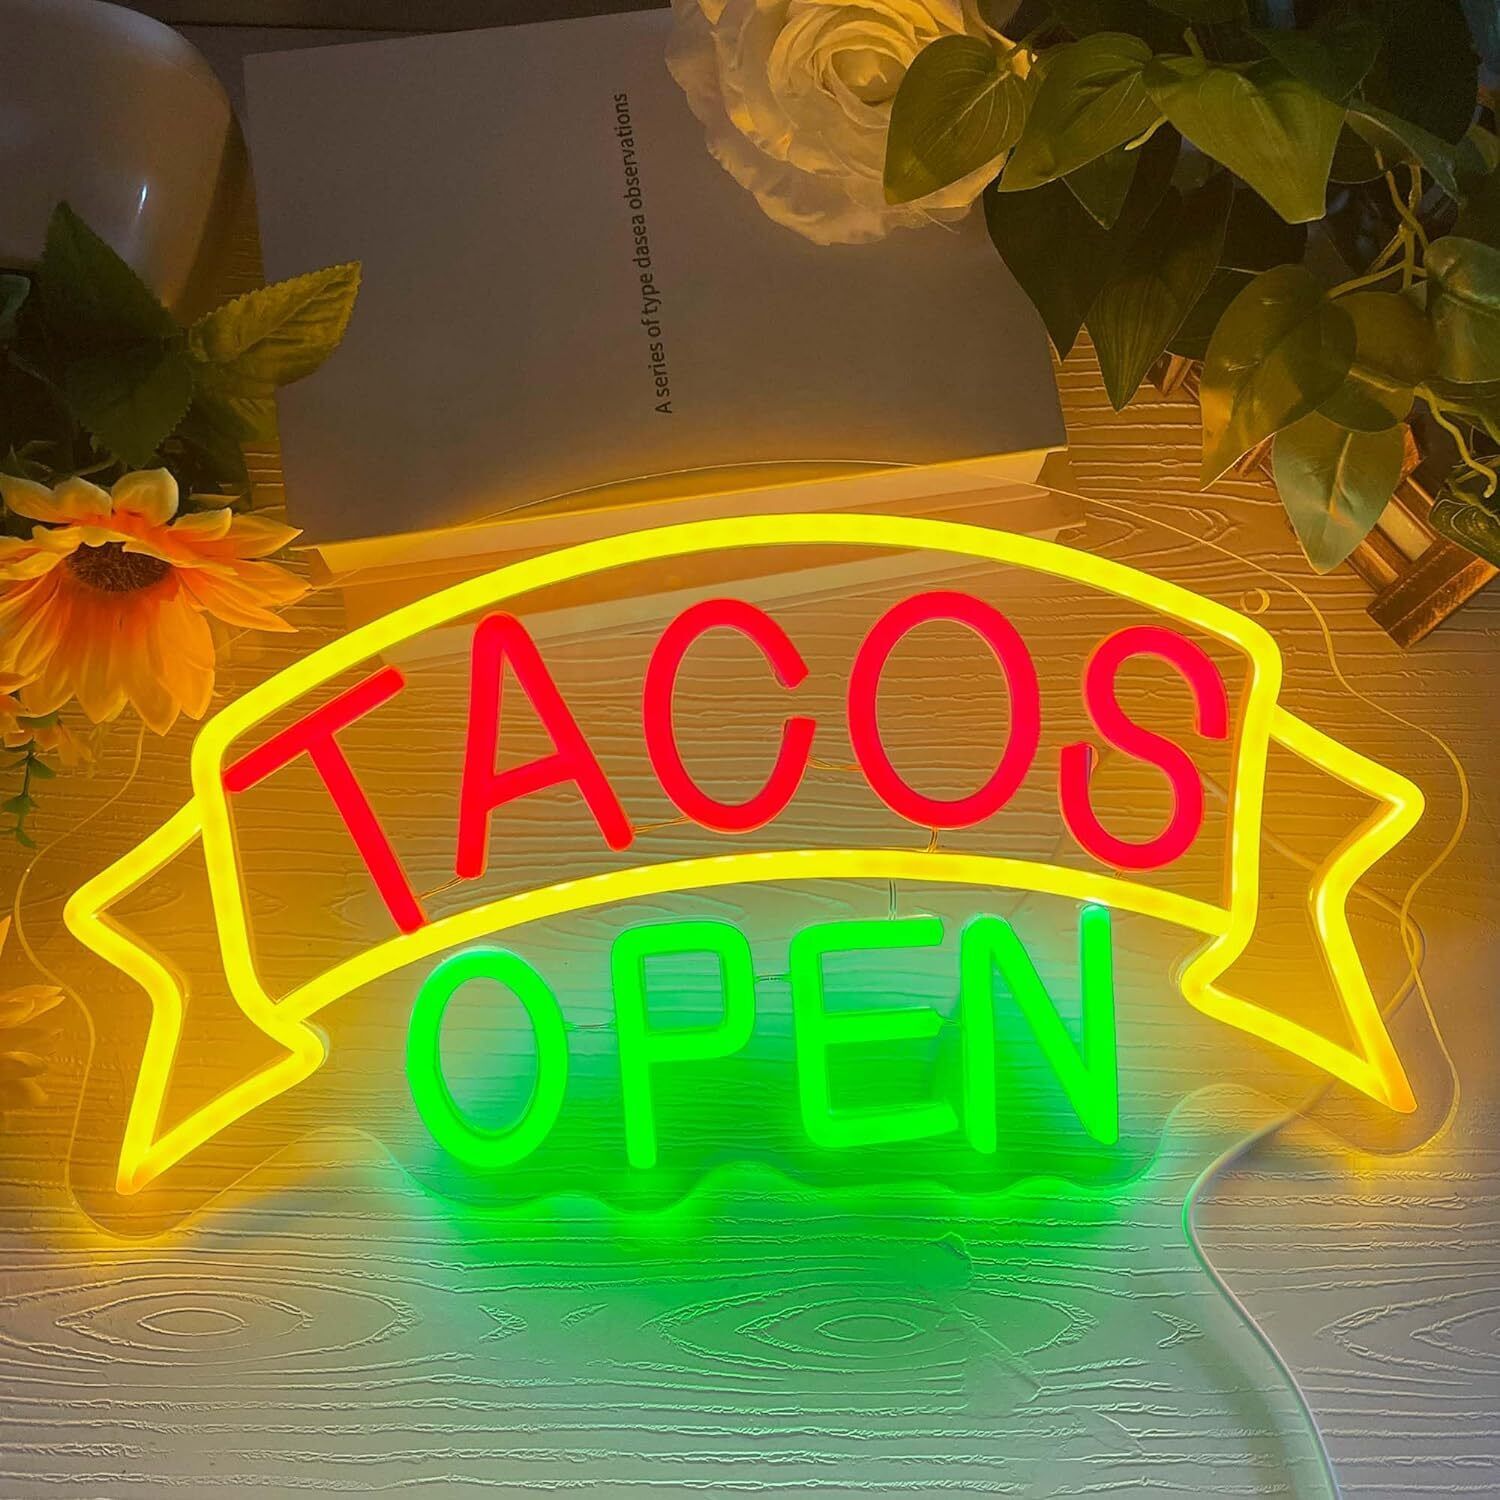 Allball Tacos Open Neon Signs for Wall Decor, LED Taco Red,Green,Yellow 